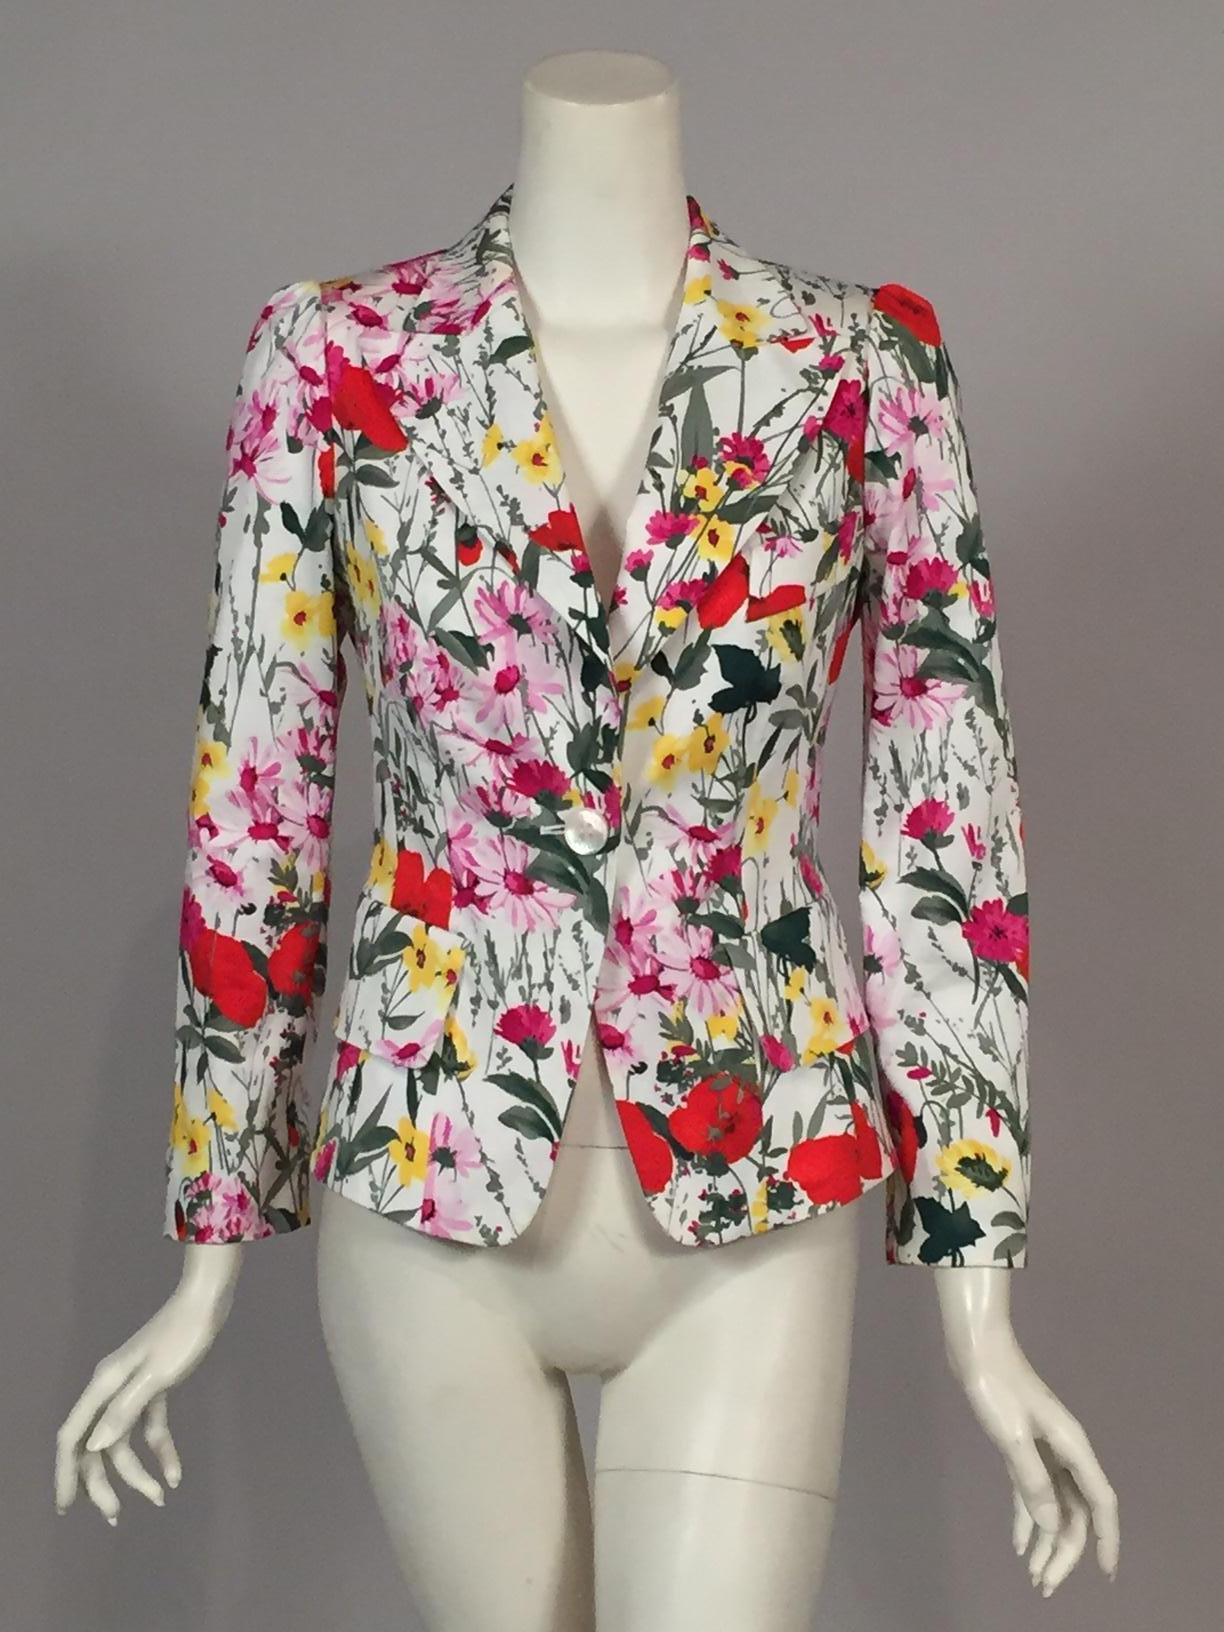 This is the most cheerful summer jacket you could ever wish for. Bright pink, yellow,and orange flowers and several shades of green leaves on white cotton will put a pop of color in to your wardrobe. The jacket has notched lapels, a single button